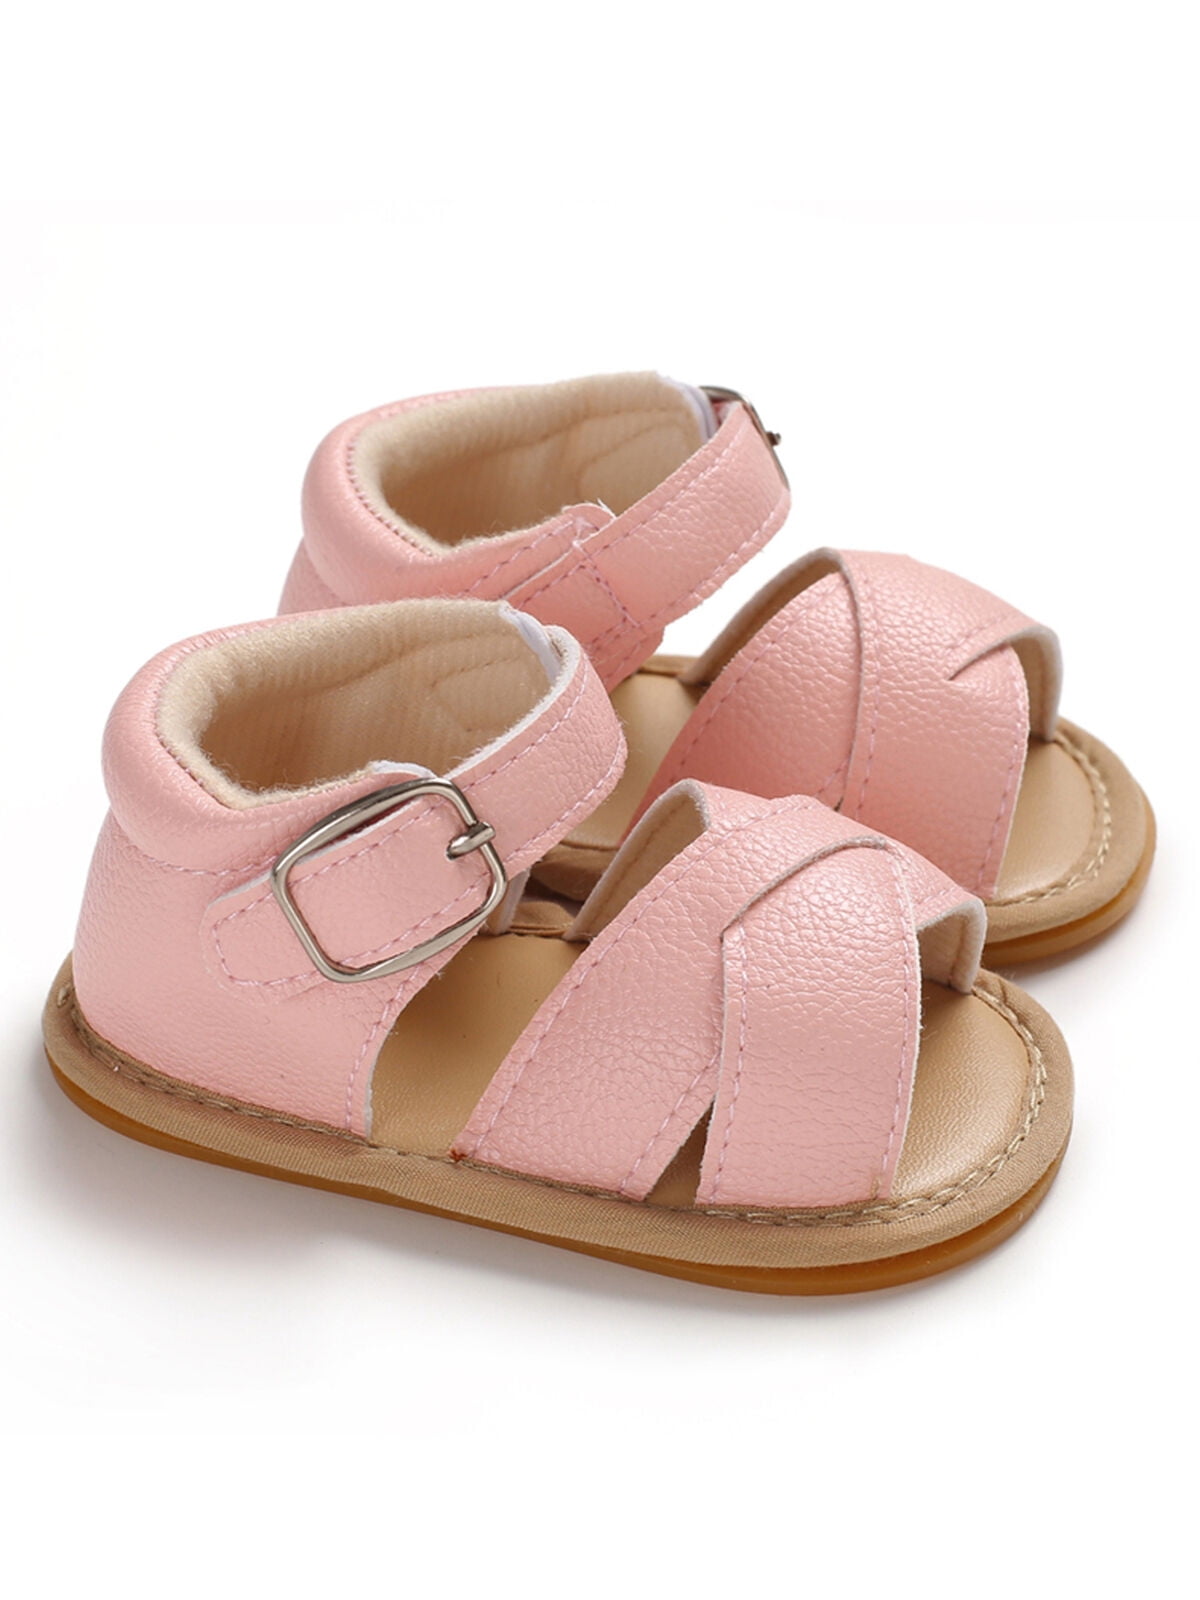 0-18 Months Baby Girls Sandals Toddler Princess Shoes for Summer Cute ...